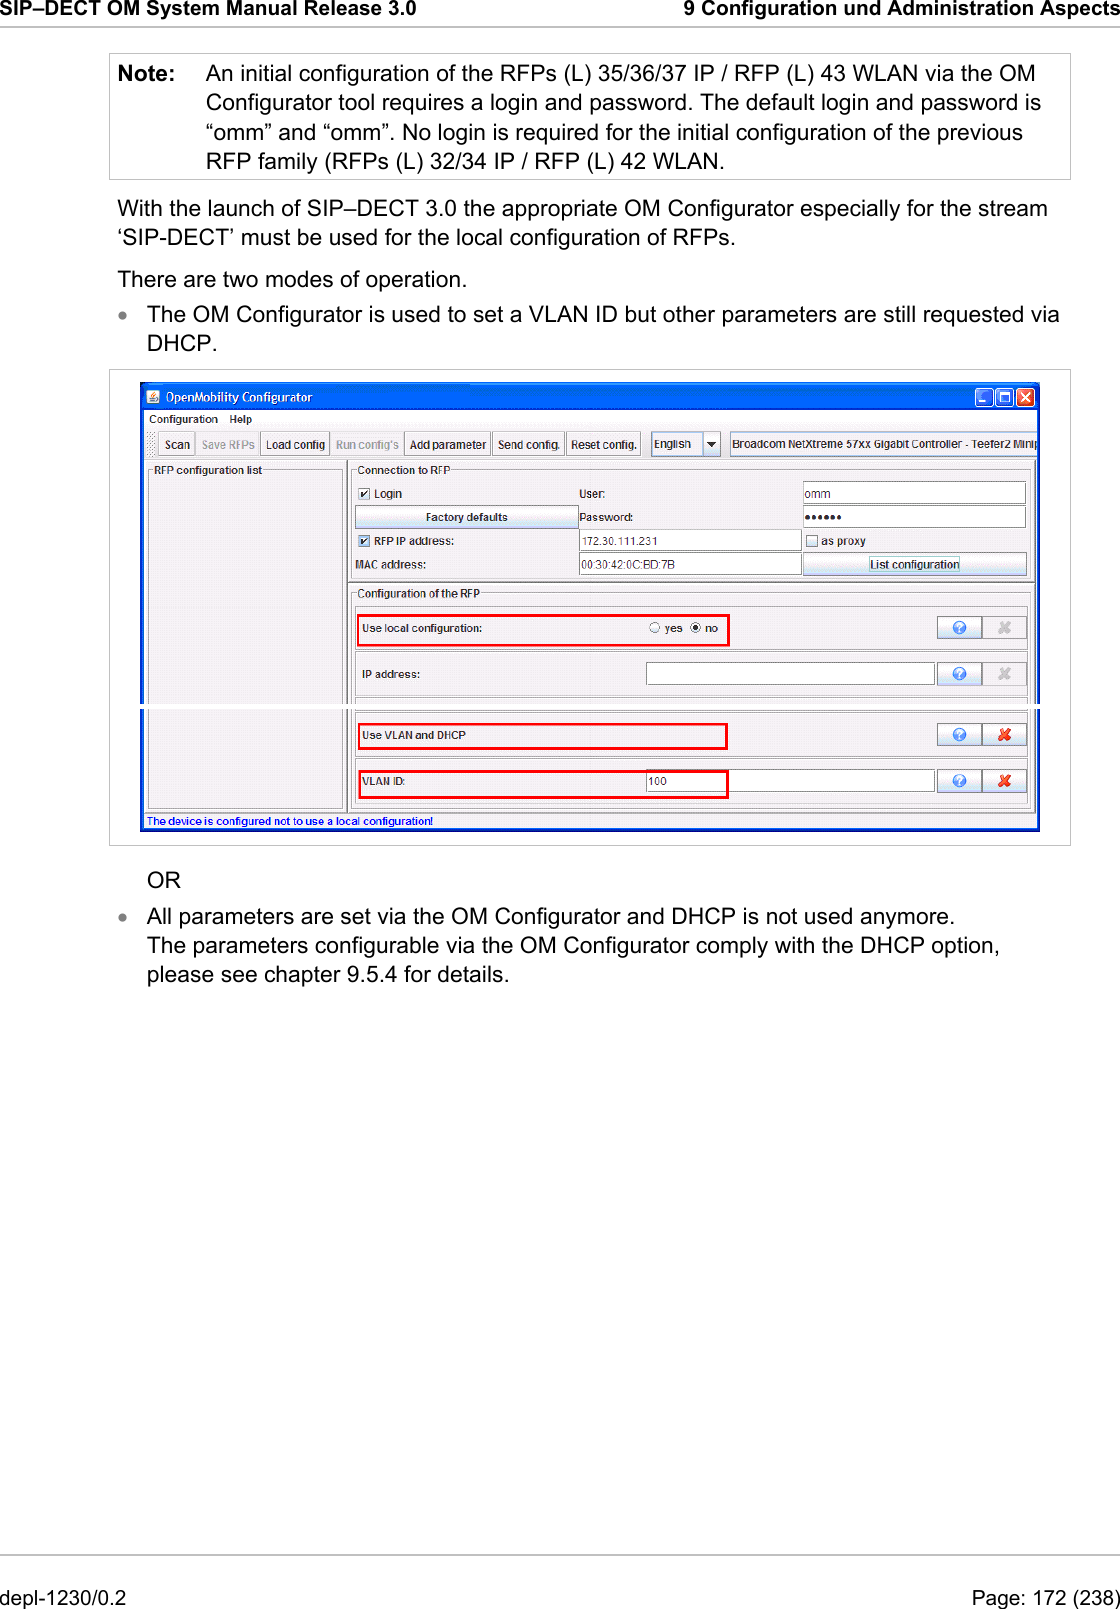 SIP–DECT OM System Manual Release 3.0  9 Configuration und Administration Aspects Note:  An initial configuration of the RFPs (L) 35/36/37 IP / RFP (L) 43 WLAN via the OM Configurator tool requires a login and password. The default login and password is “omm” and “omm”. No login is required for the initial configuration of the previous RFP family (RFPs (L) 32/34 IP / RFP (L) 42 WLAN. With the launch of SIP–DECT 3.0 the appropriate OM Configurator especially for the stream ‘SIP-DECT’ must be used for the local configuration of RFPs. There are two modes of operation. The OM Configurator is used to set a VLAN ID but other parameters are still requested via DHCP. •  OR All parameters are set via the OM Configurator and DHCP is not used anymore. The parameters configurable via the OM Configurator comply with the DHCP option, please see chapter 9.5.4 for details. • depl-1230/0.2  Page: 172 (238) 